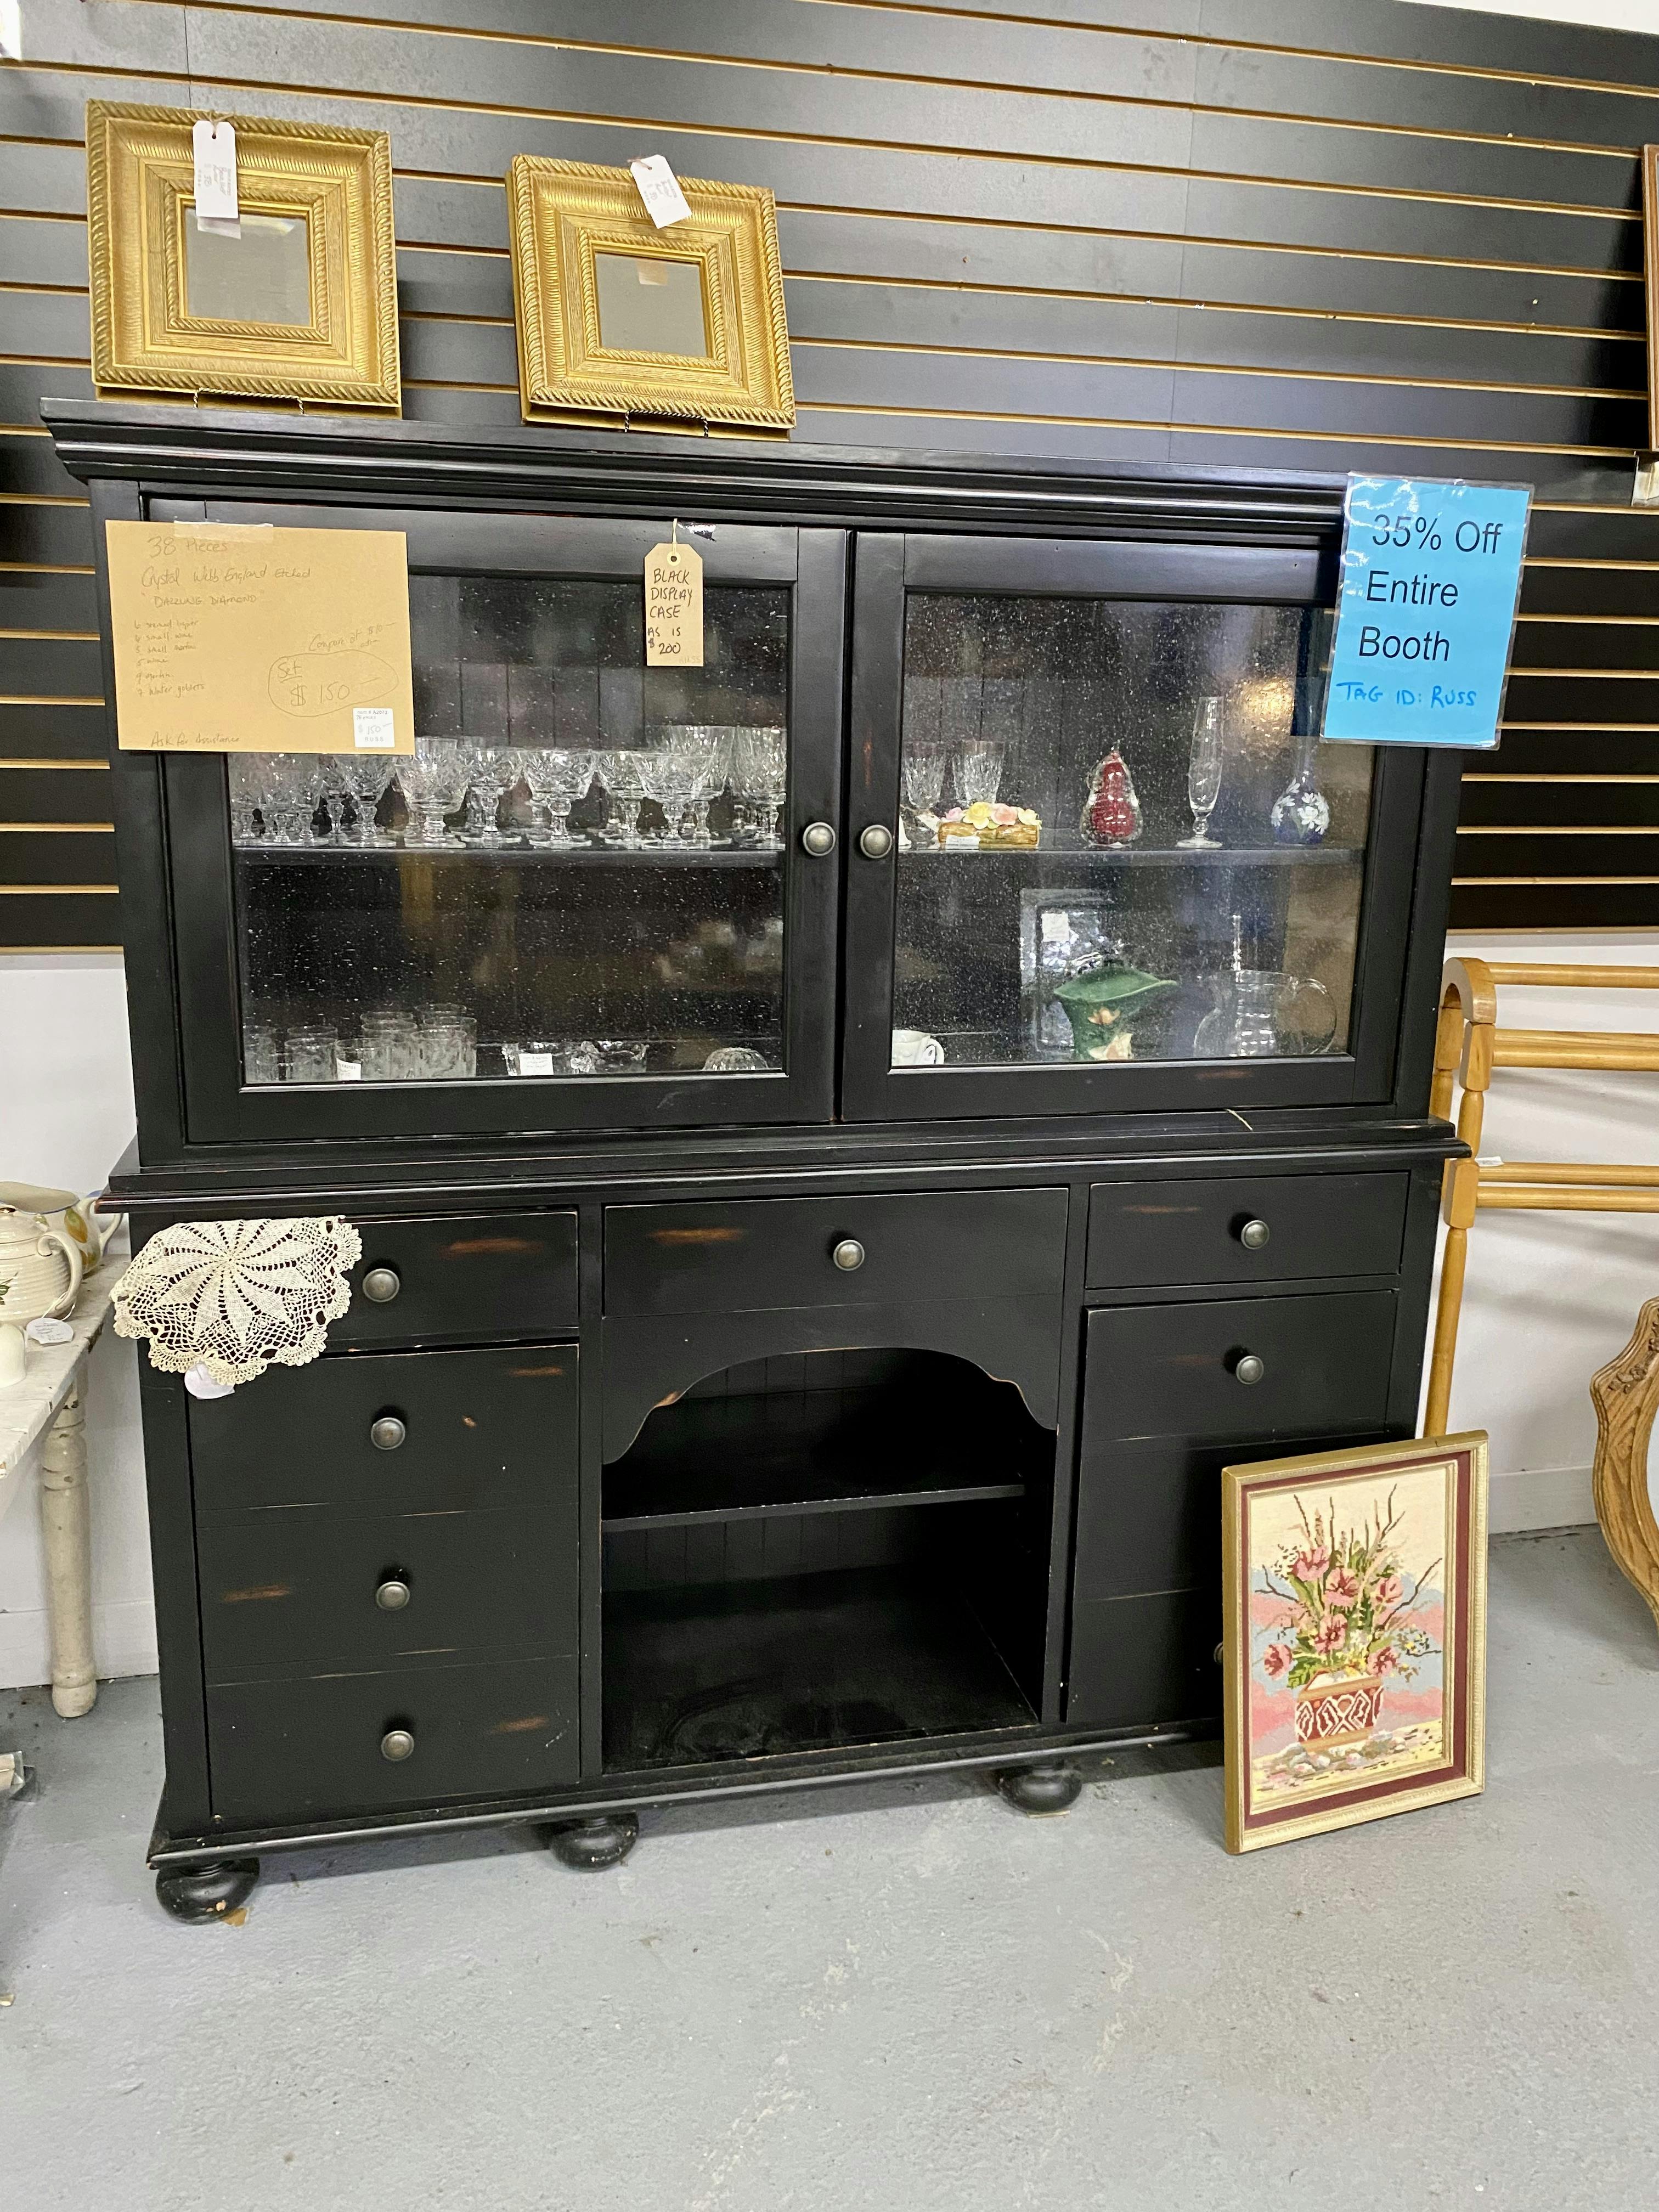 Black Cabinet with a worn finish and bubble textured glass doors WAS $200 NOW $130